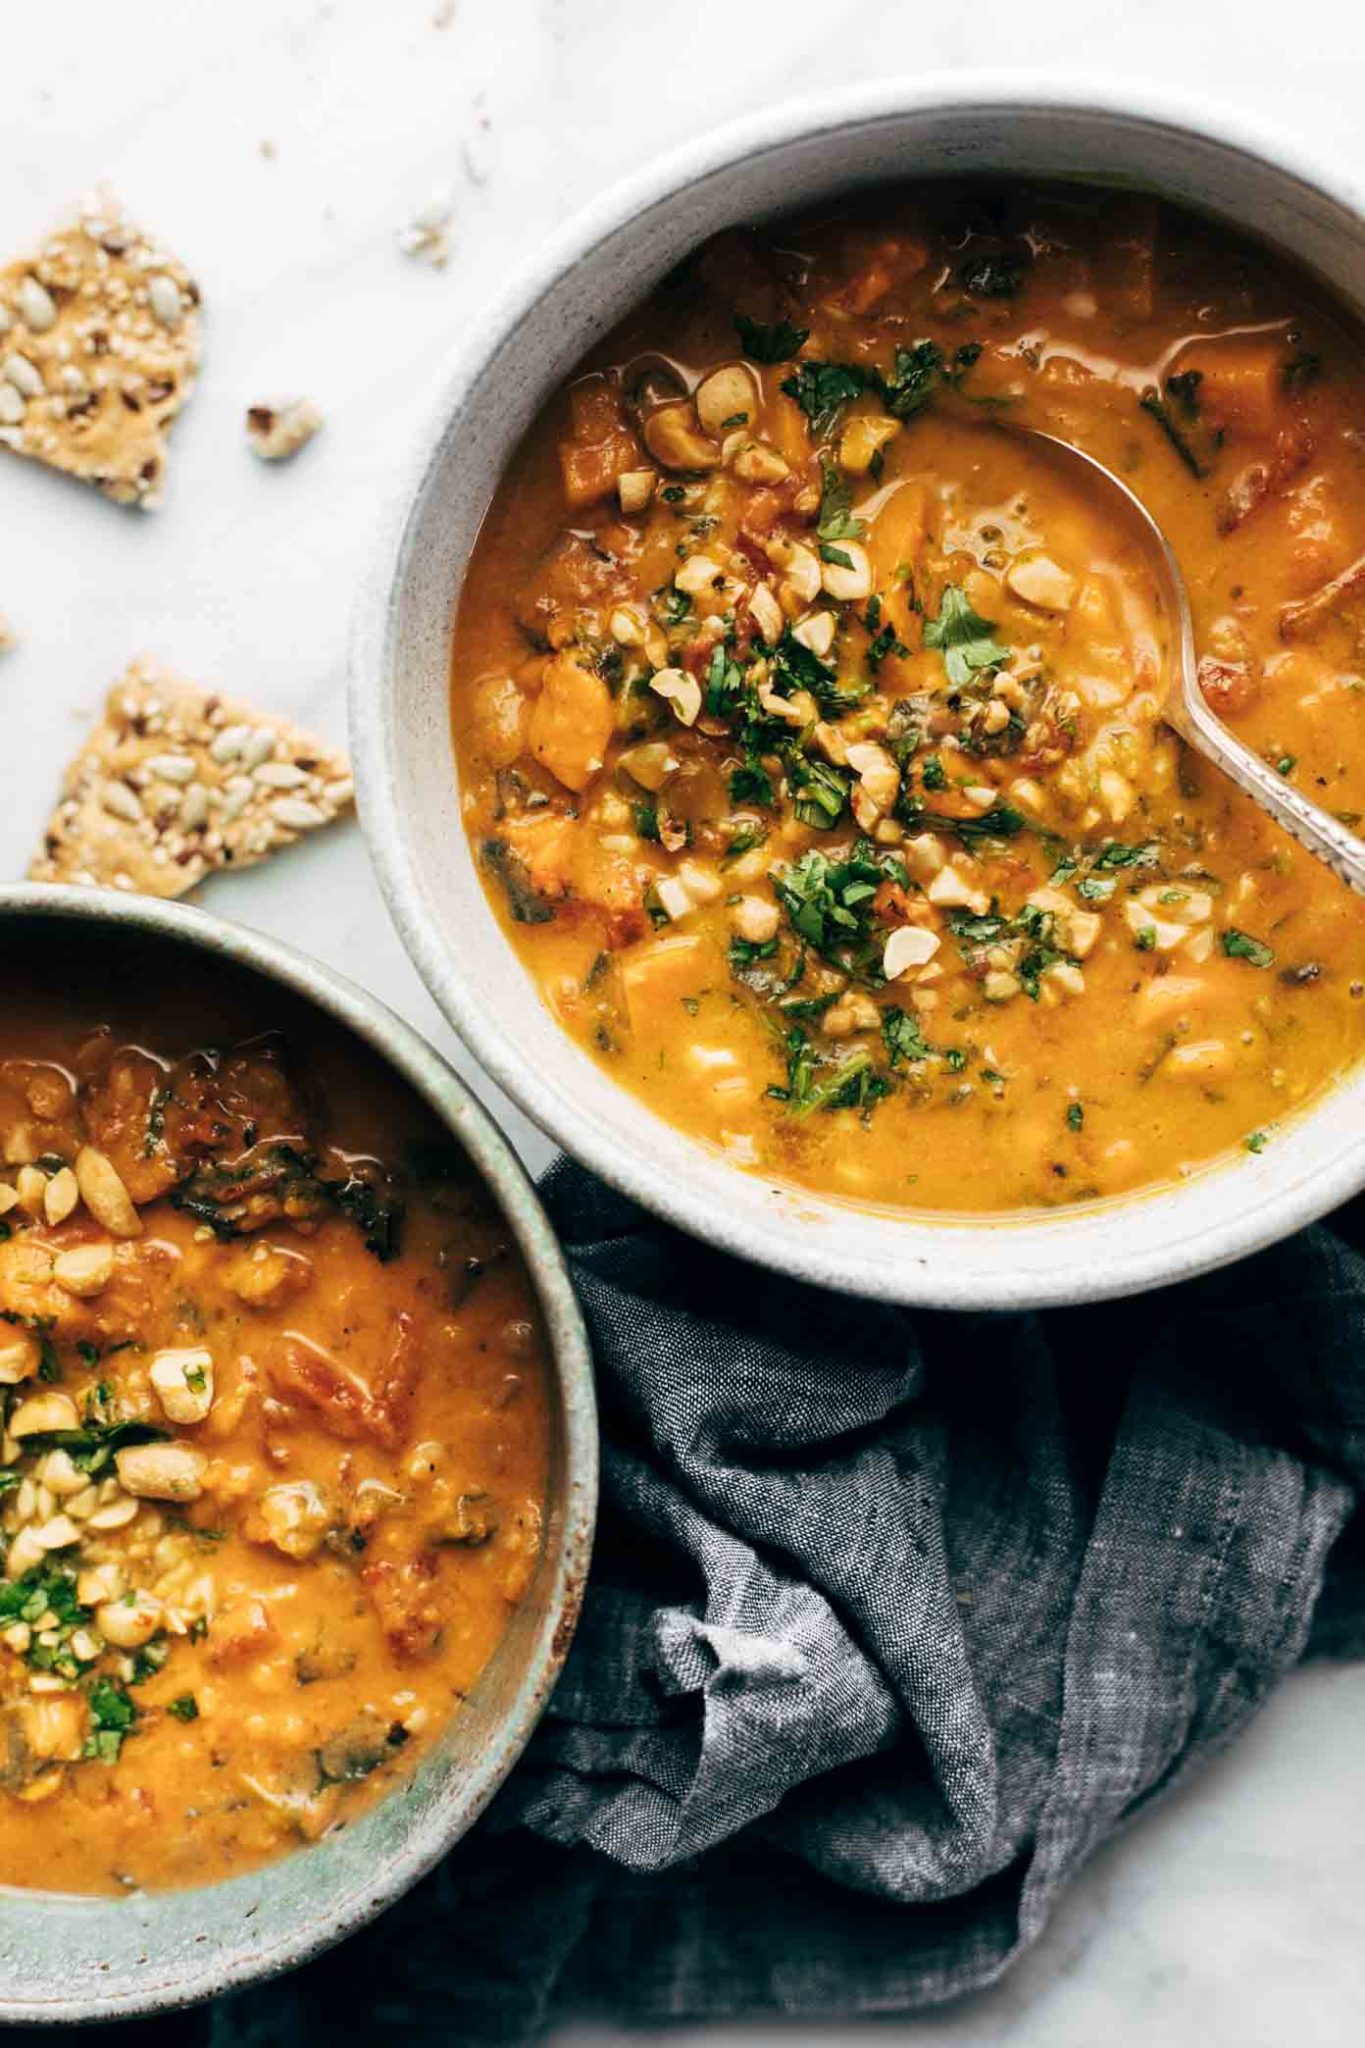 Spicy Peanut Soup with Sweet Potato and Kale